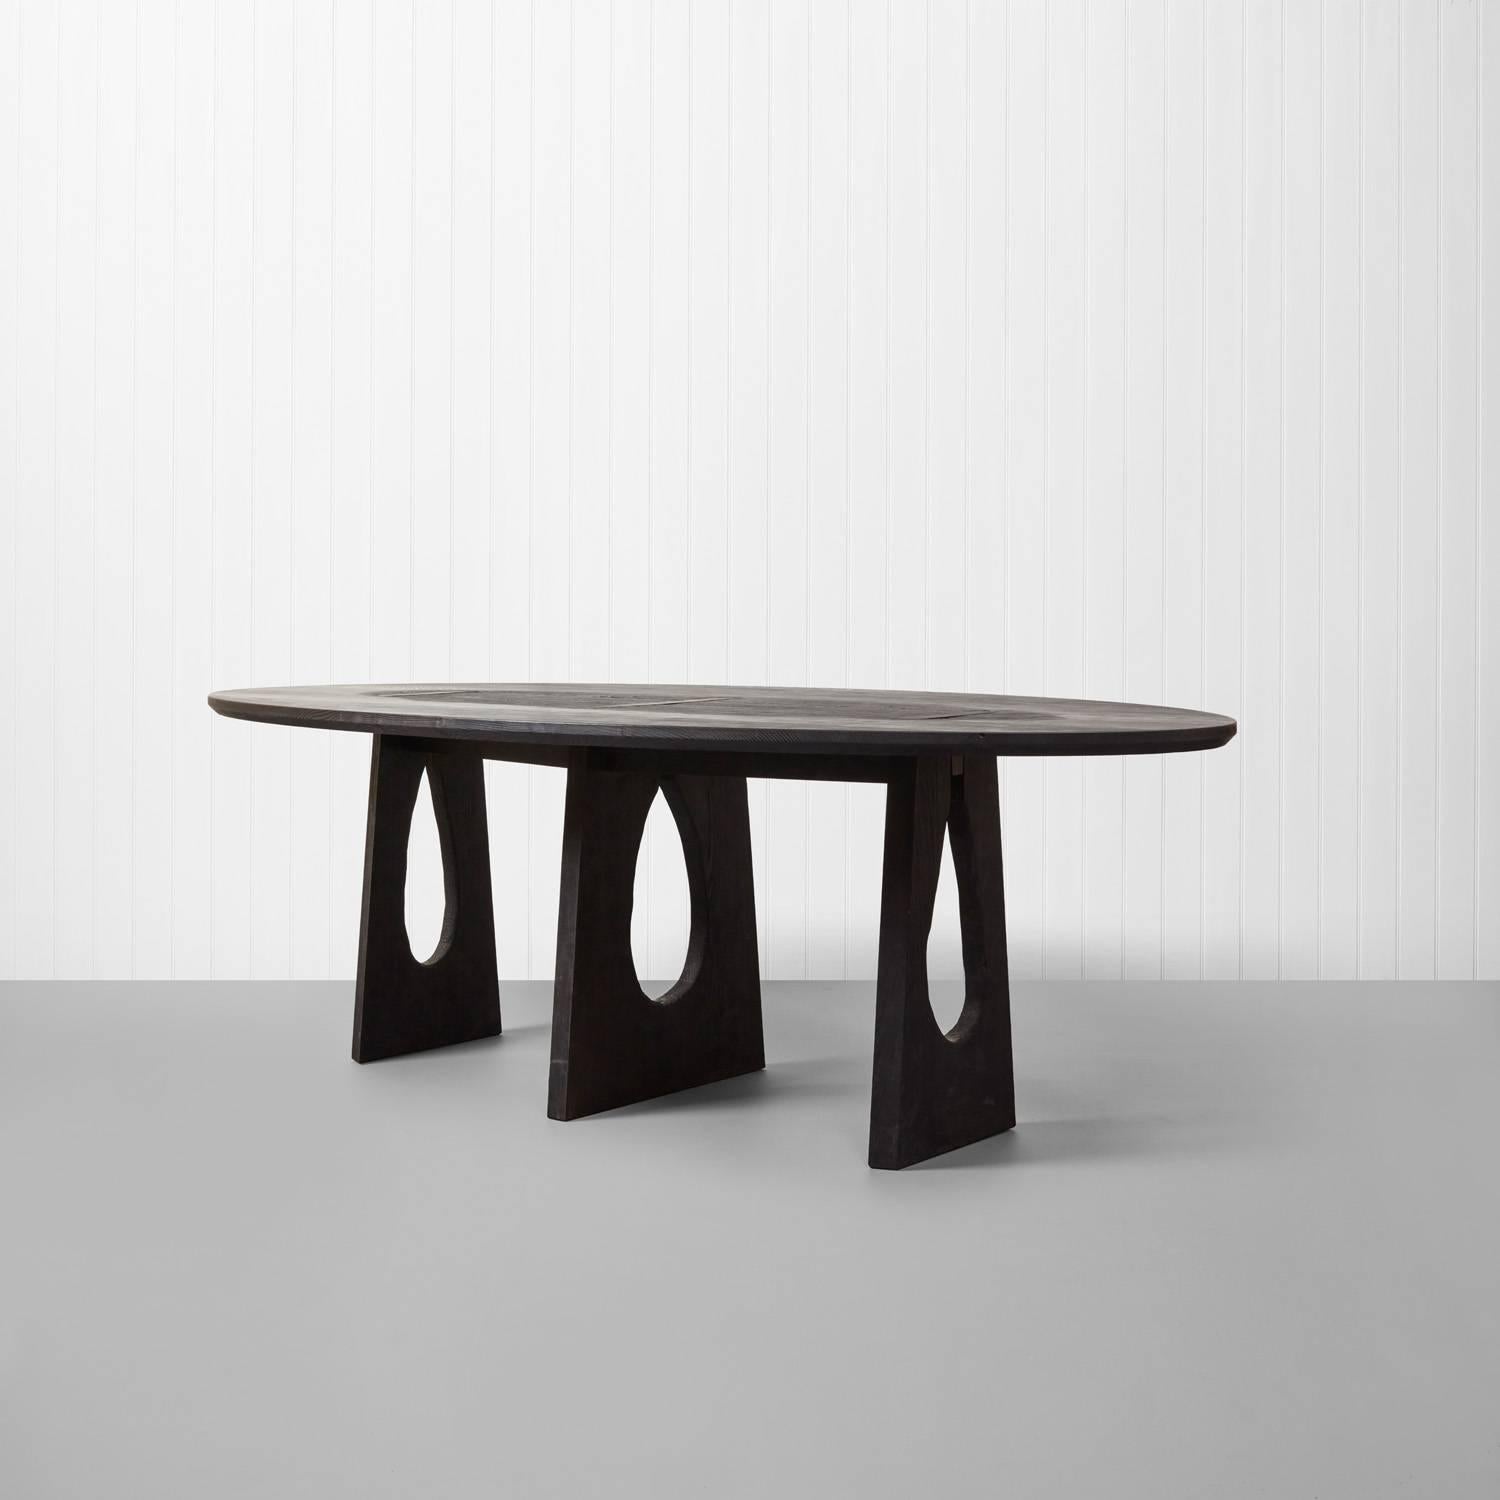 Scorched ash dining table by Sebastian Cox, an exclusive, one off piece constructed from solid Ash and blackened on the exterior. 

A large dining table by celebrated furniture maker Sebastian Cox constructed in solid Ash with a scorched,